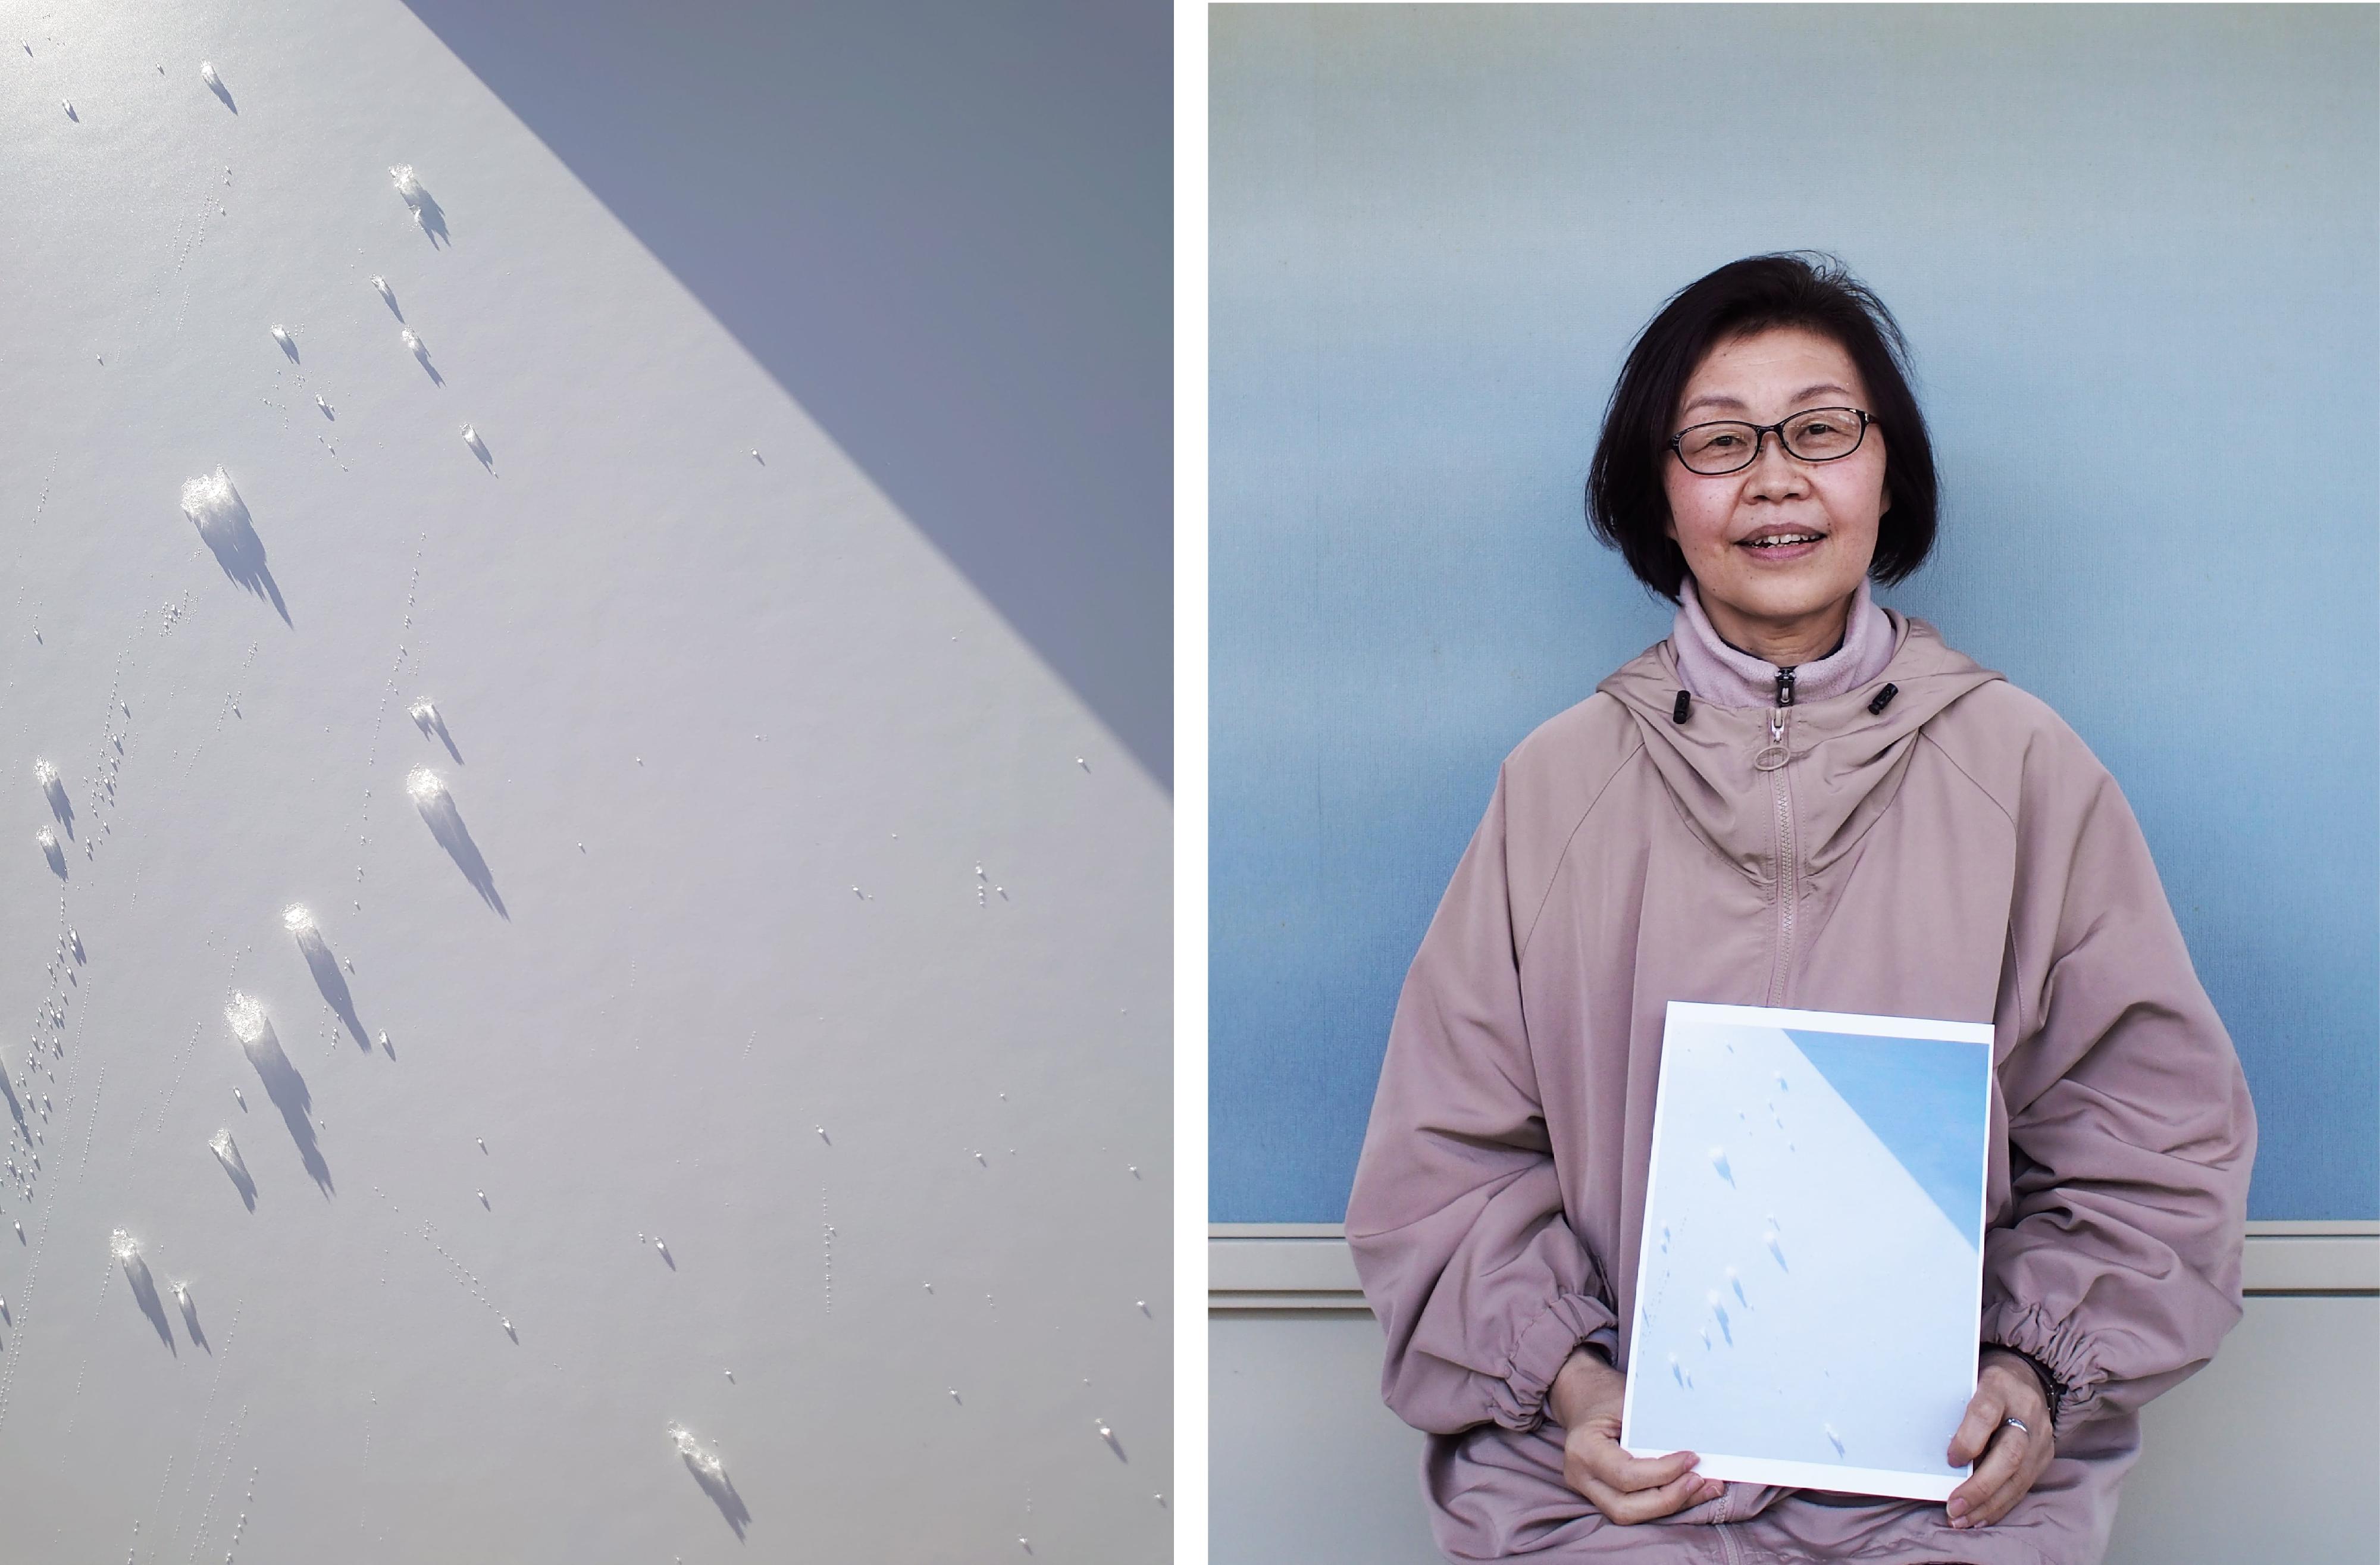 The Hong Kong House at the Echigo-Tsumari Art Triennale 2022 is open in Tsunan, Niigata Prefecture, Japan, from today (April 29) to November 13. Photo shows "Painting by God" (left) created by a participant (right) in the photography workshop organised by Hong Kong artist anothermountainman (Stanley Wong).